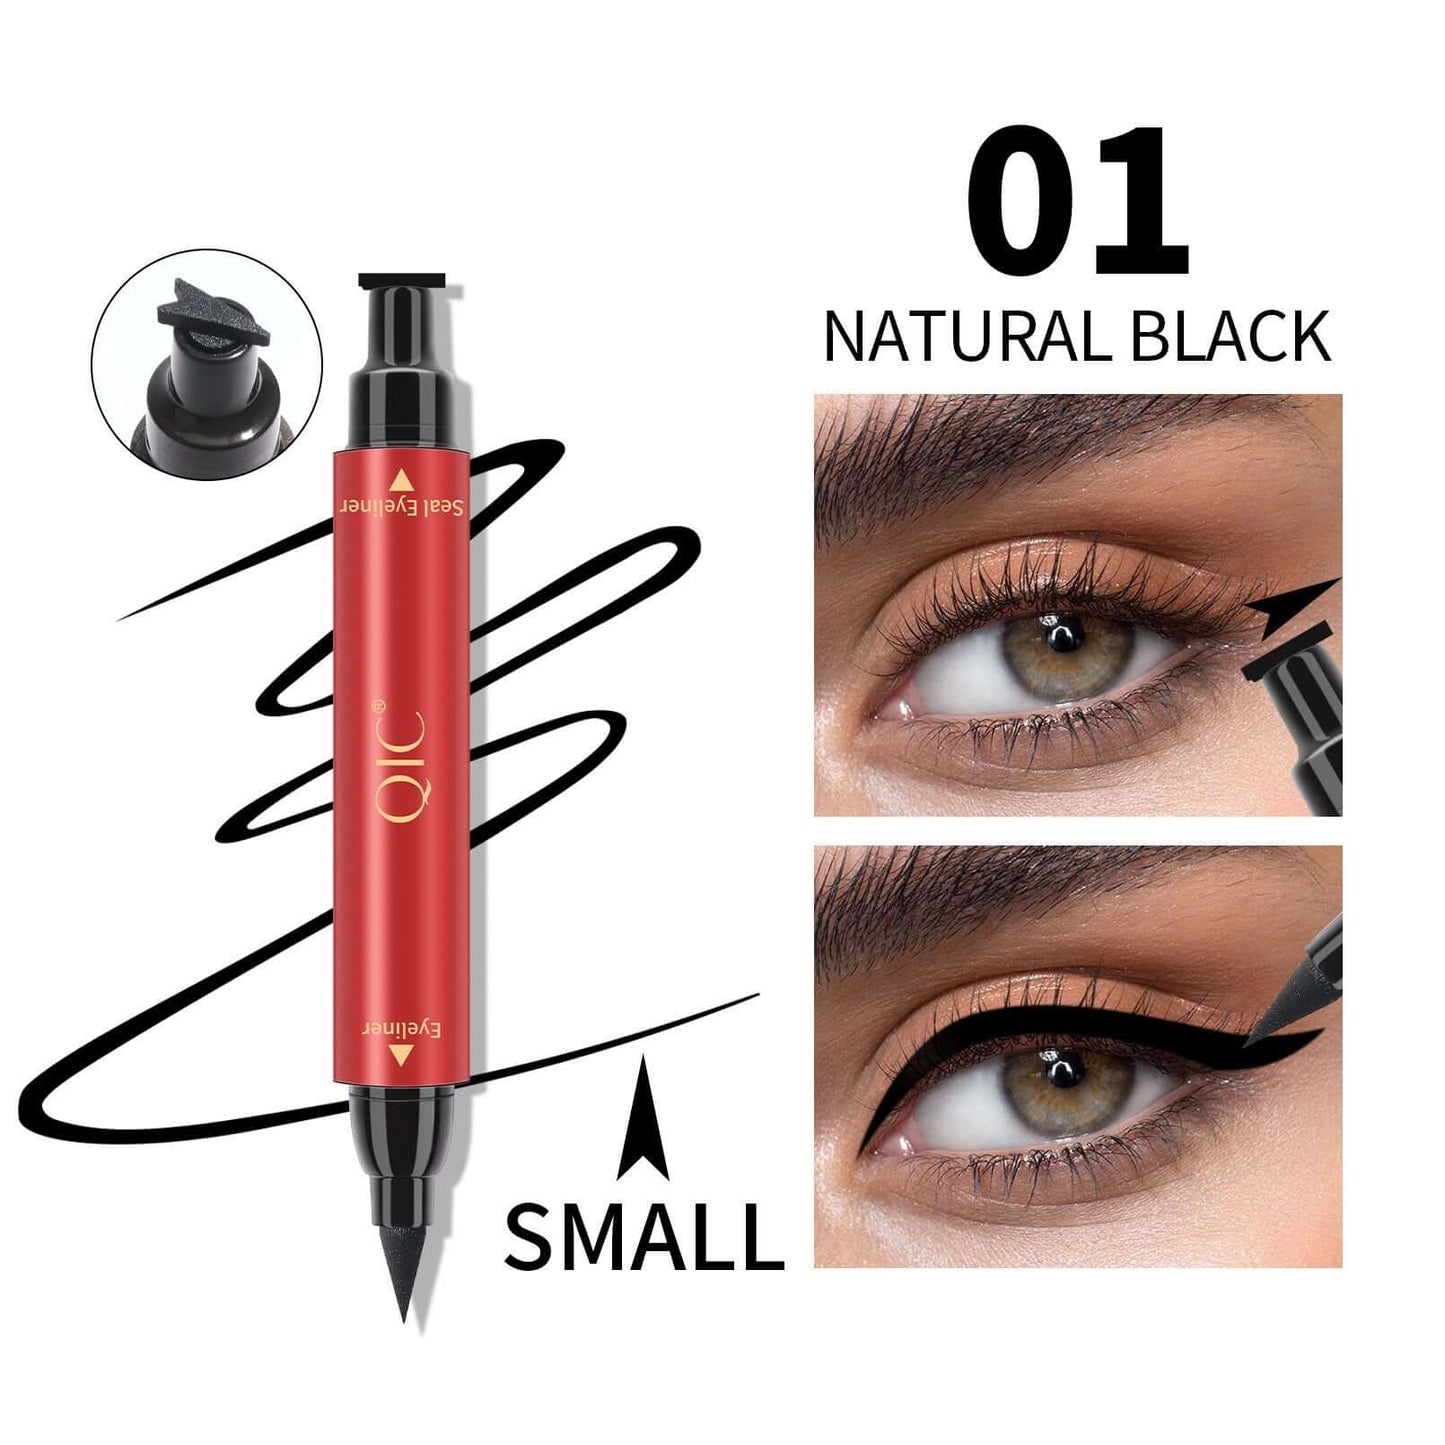 Colorful Double Head Triangular Seal Eyeliner Pen Waterproof And Non Dizzy Makeup